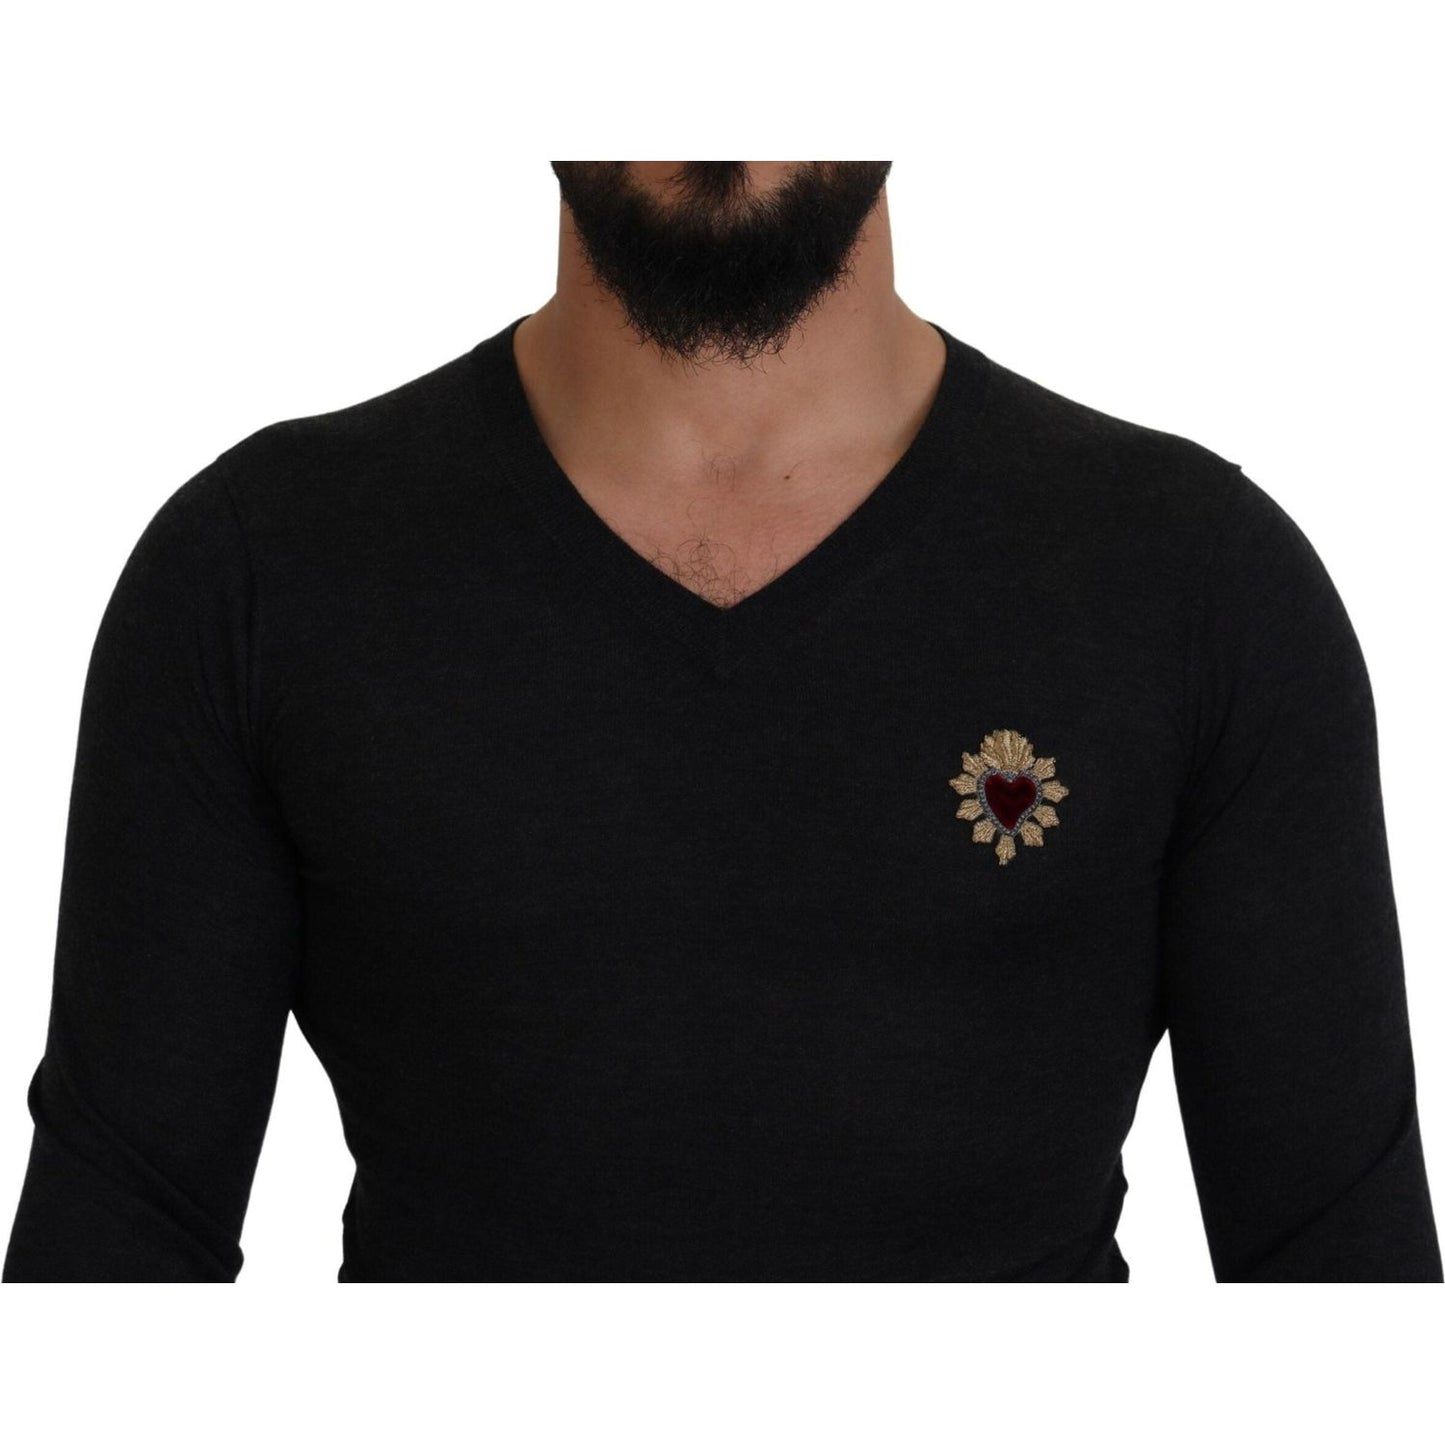 Dolce & Gabbana V-Neck Cashmere Sweater with Heart Embroidery gray-cashmere-v-neck-gold-heart-sweater